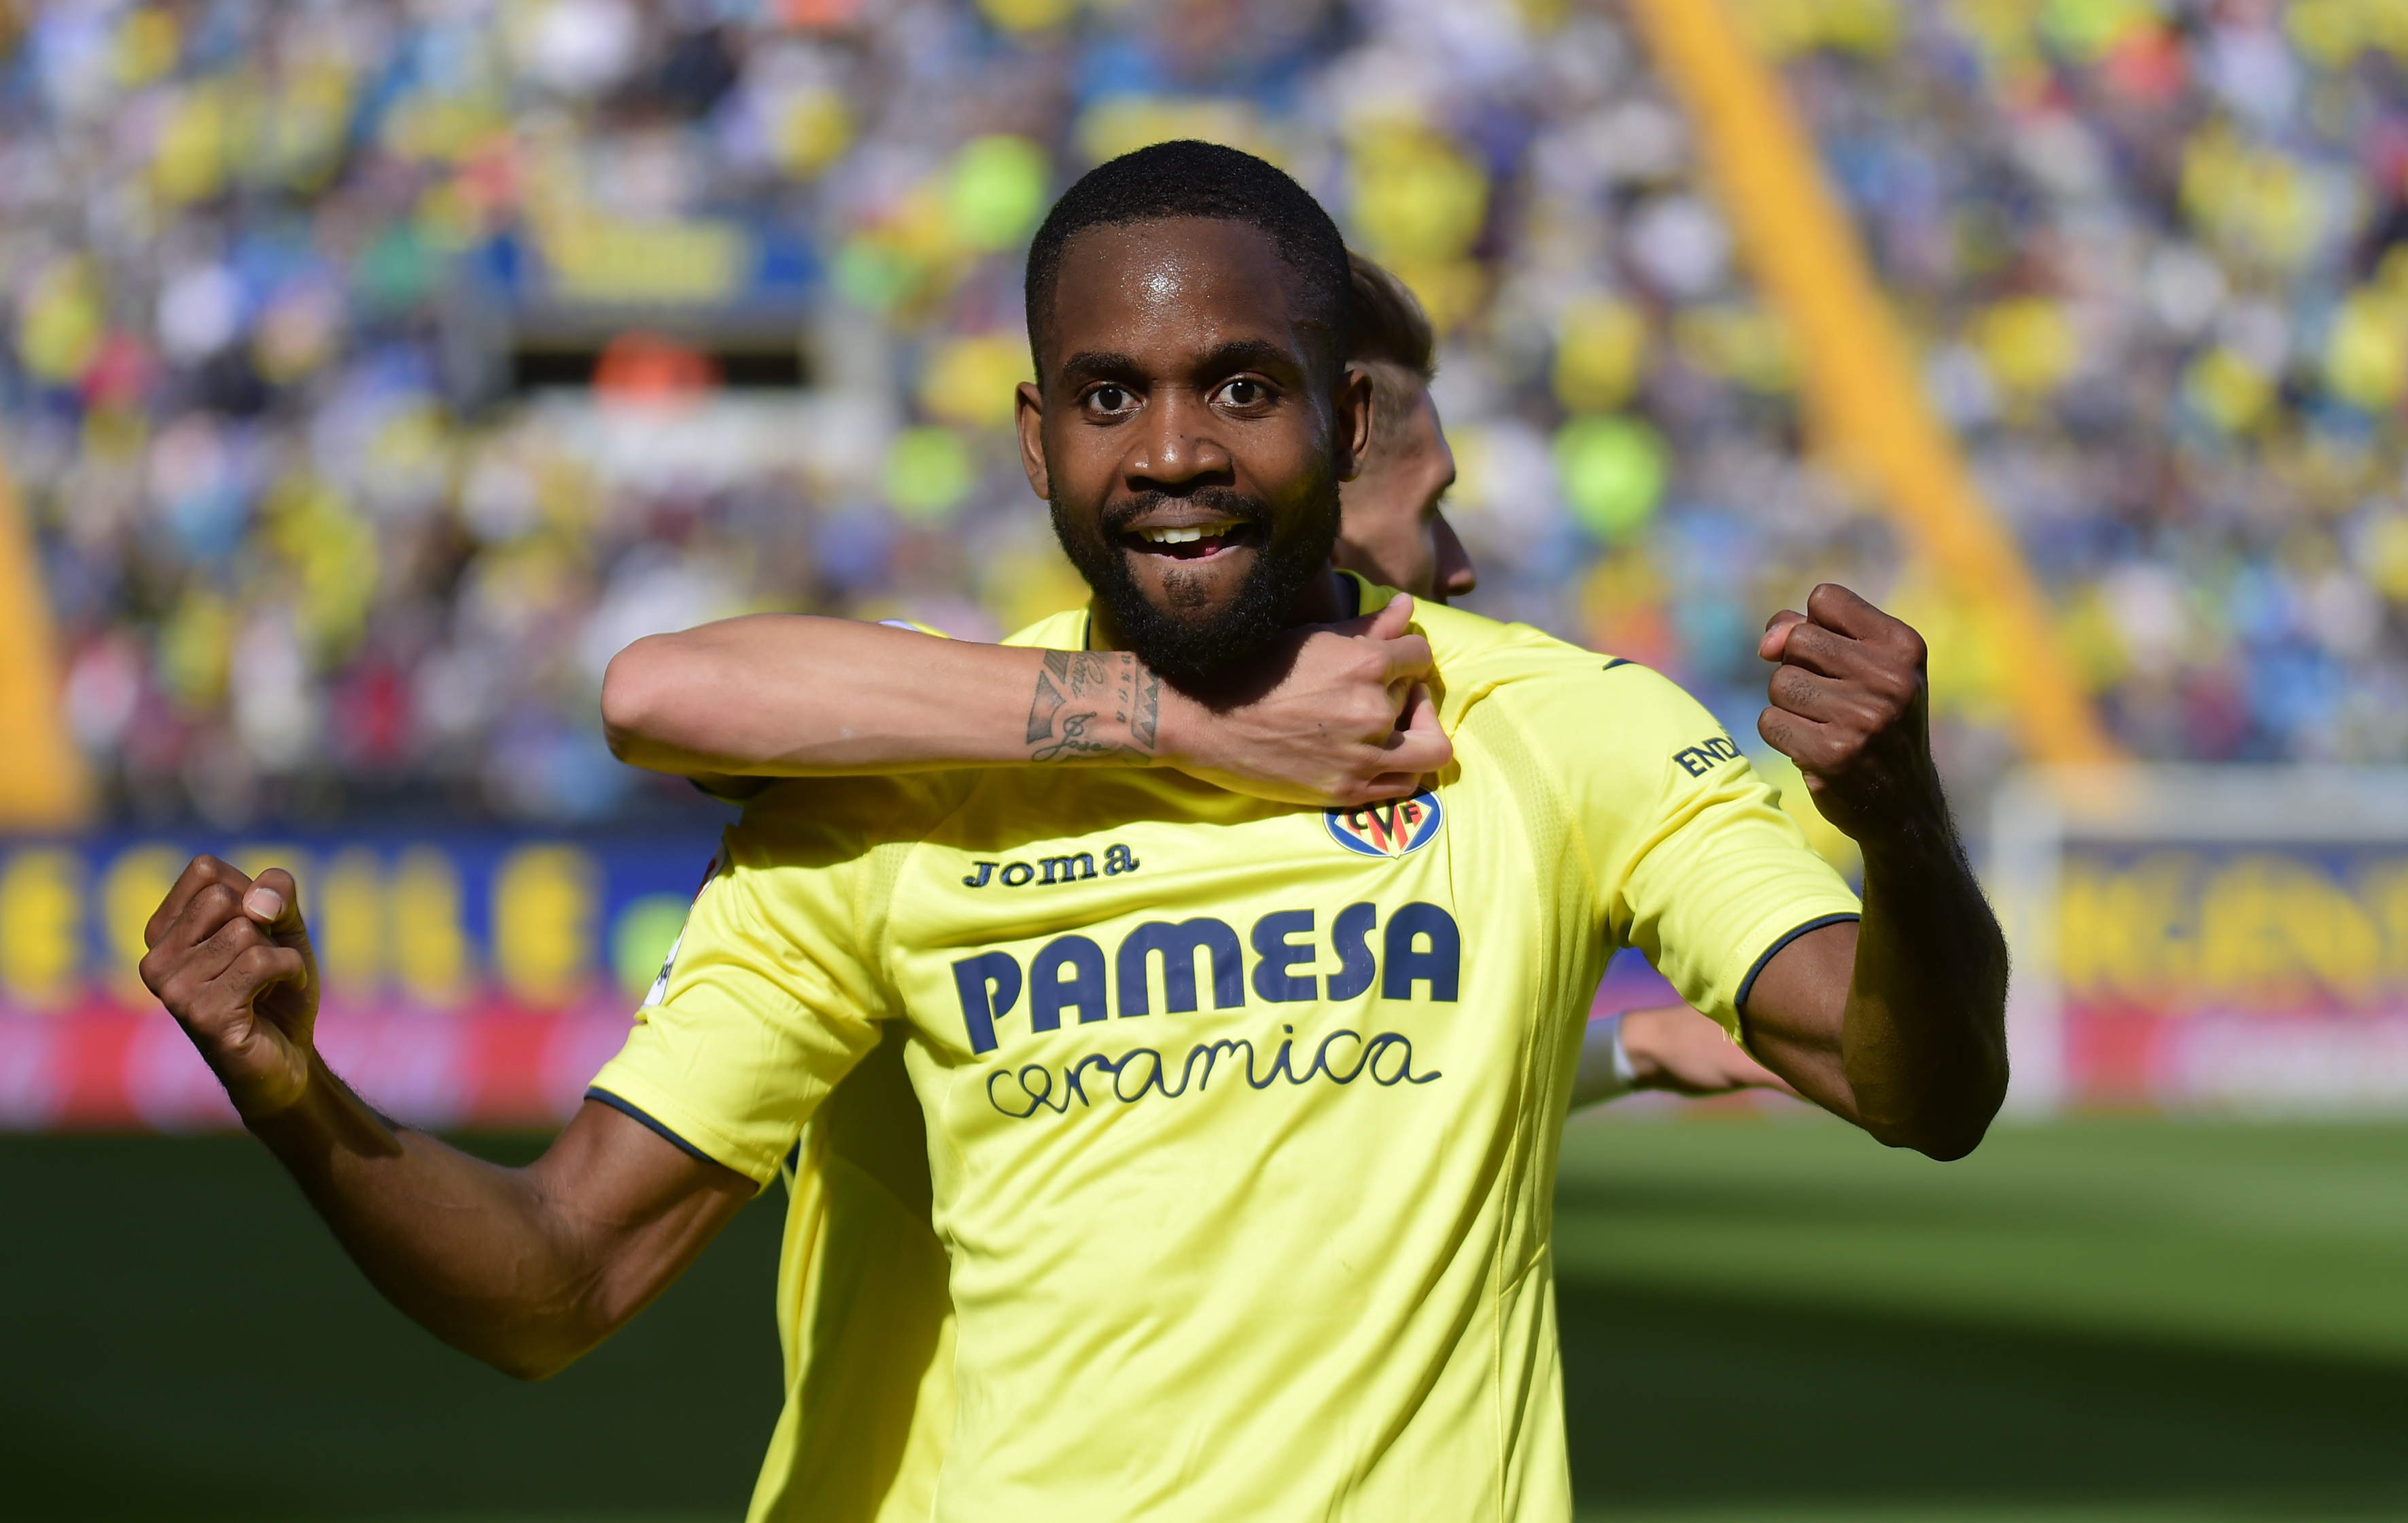 The in-form Bakambu can cause some problems for Barca. (Photo courtesy - Jose Jordan/AFP/Getty Images)